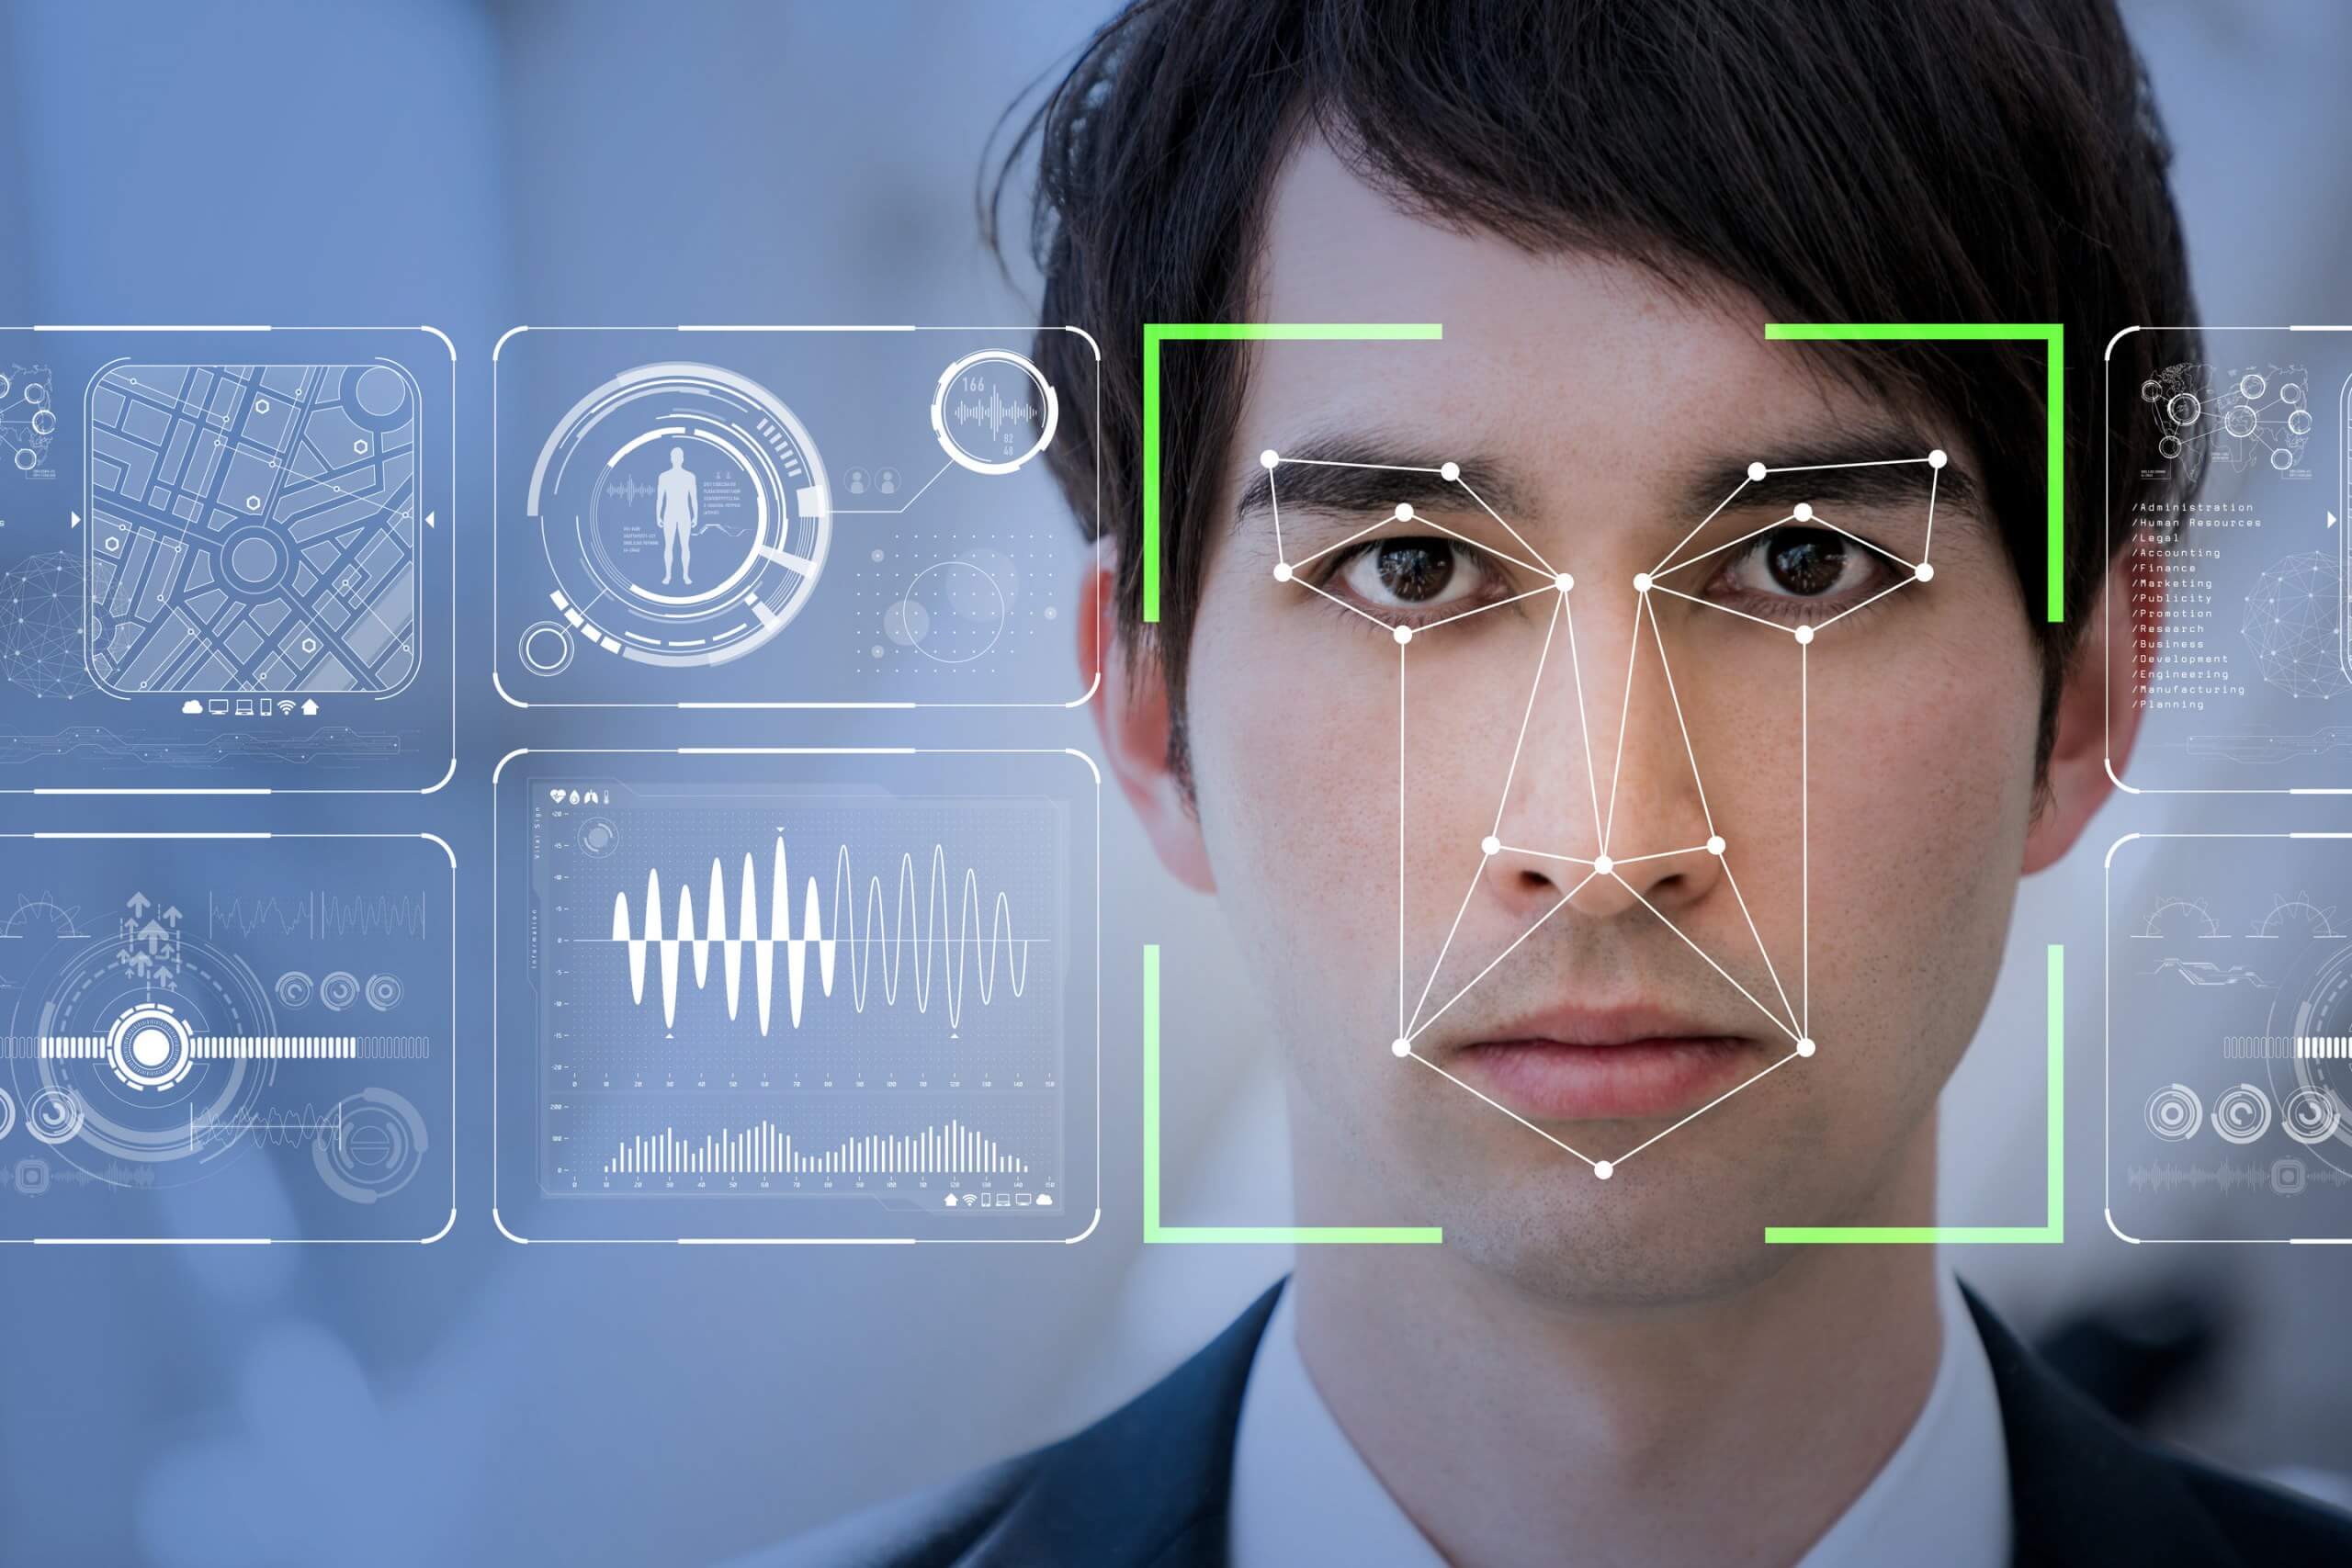 The controversy of facial recognition technology